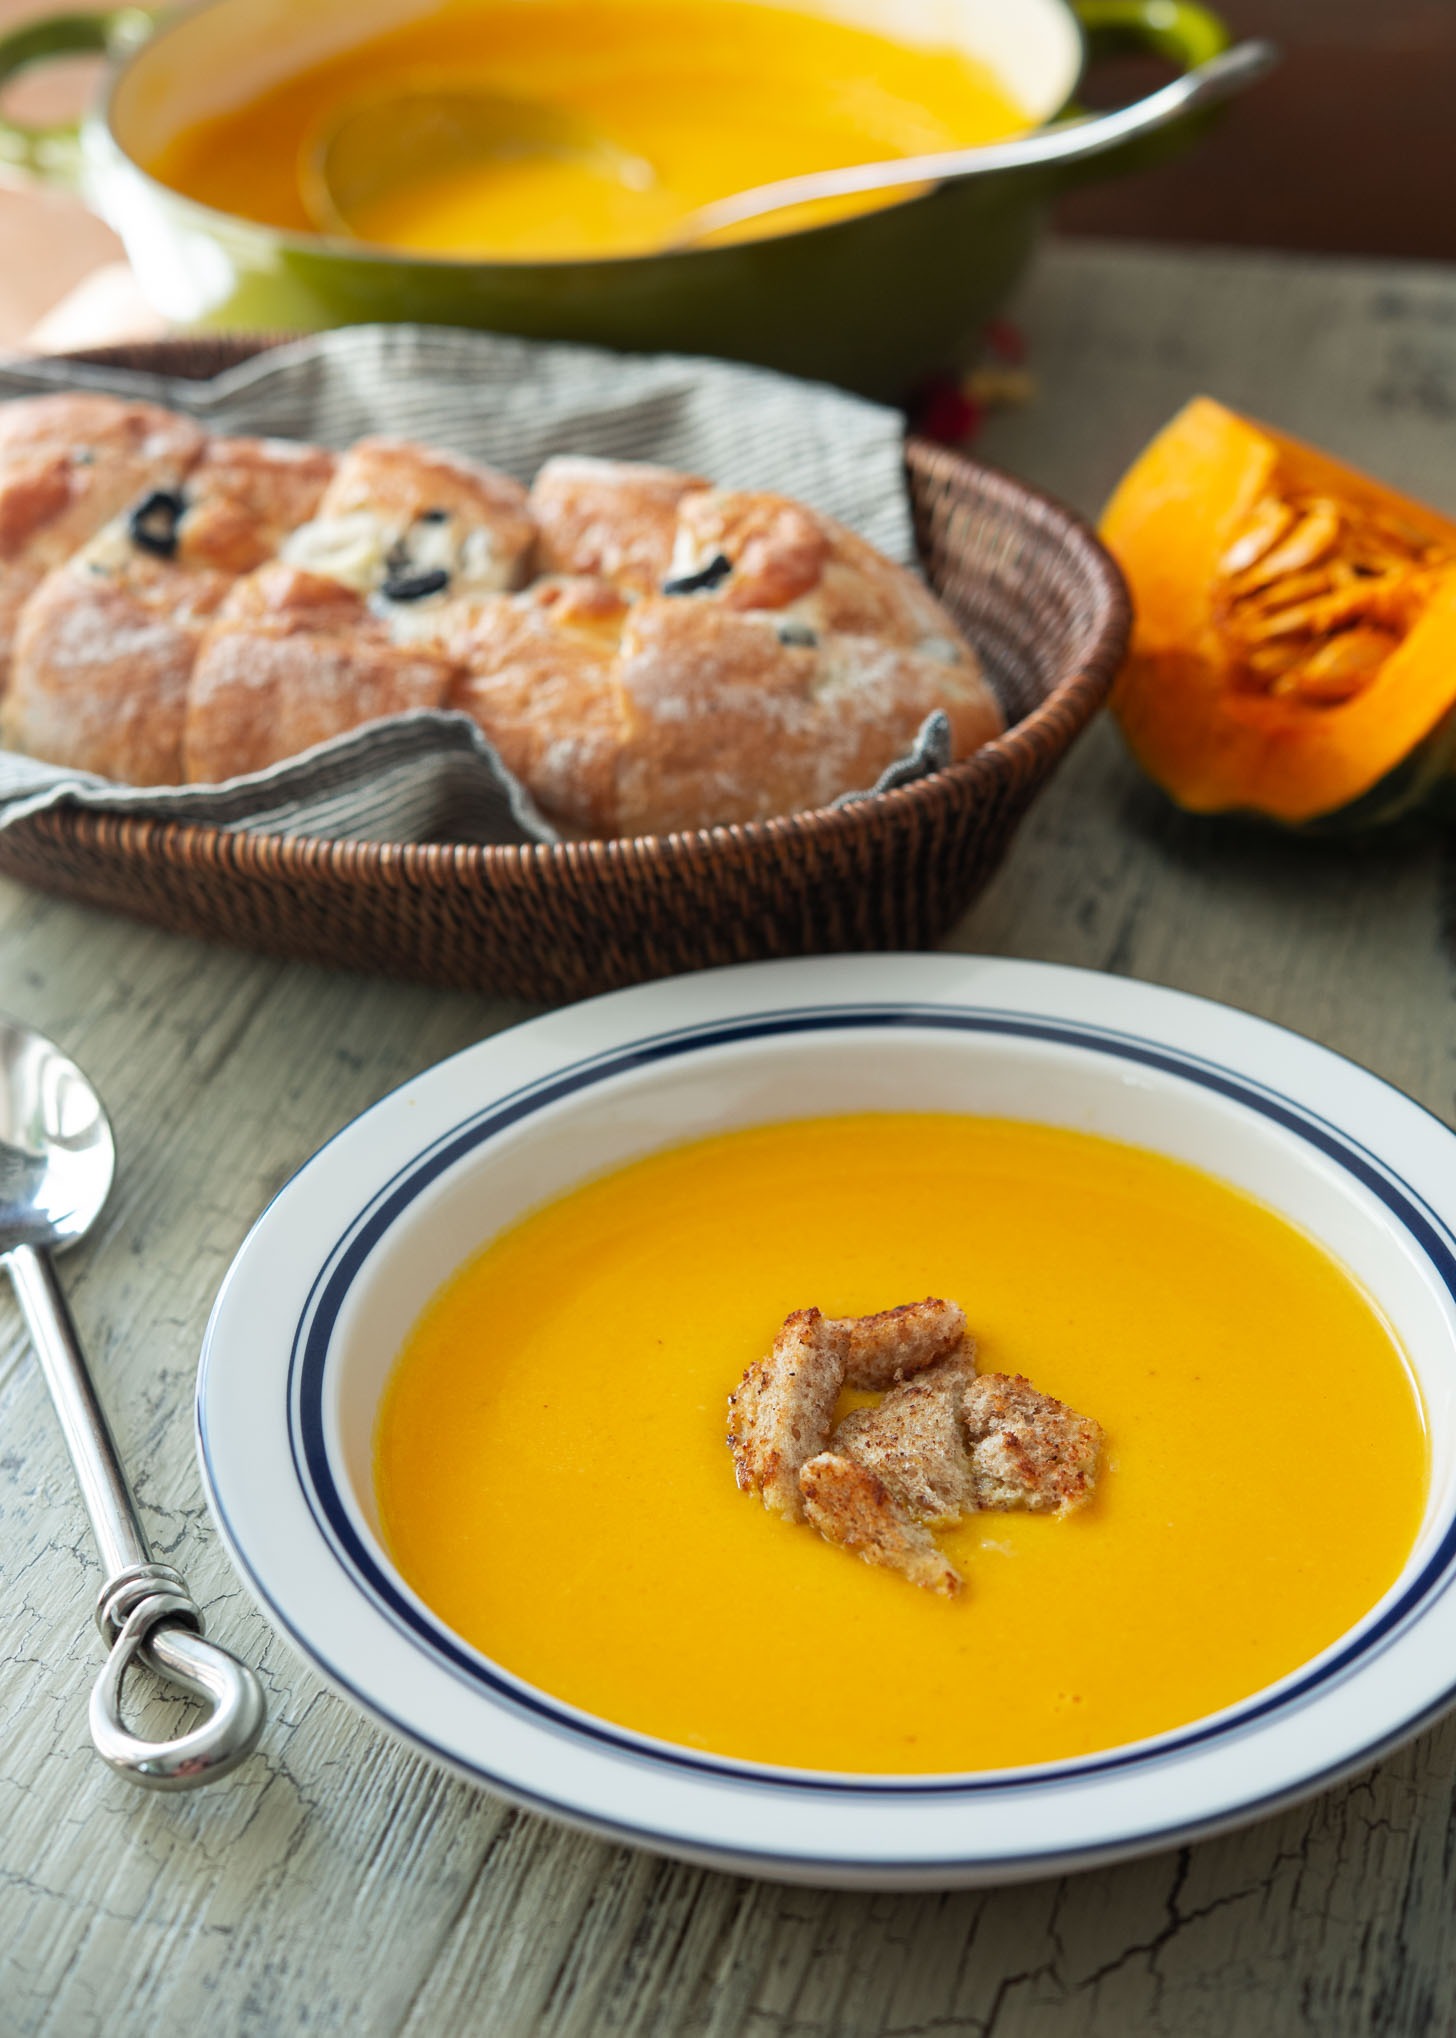 Kabocha squash soup in a serving bowl with crusty bread on the side.